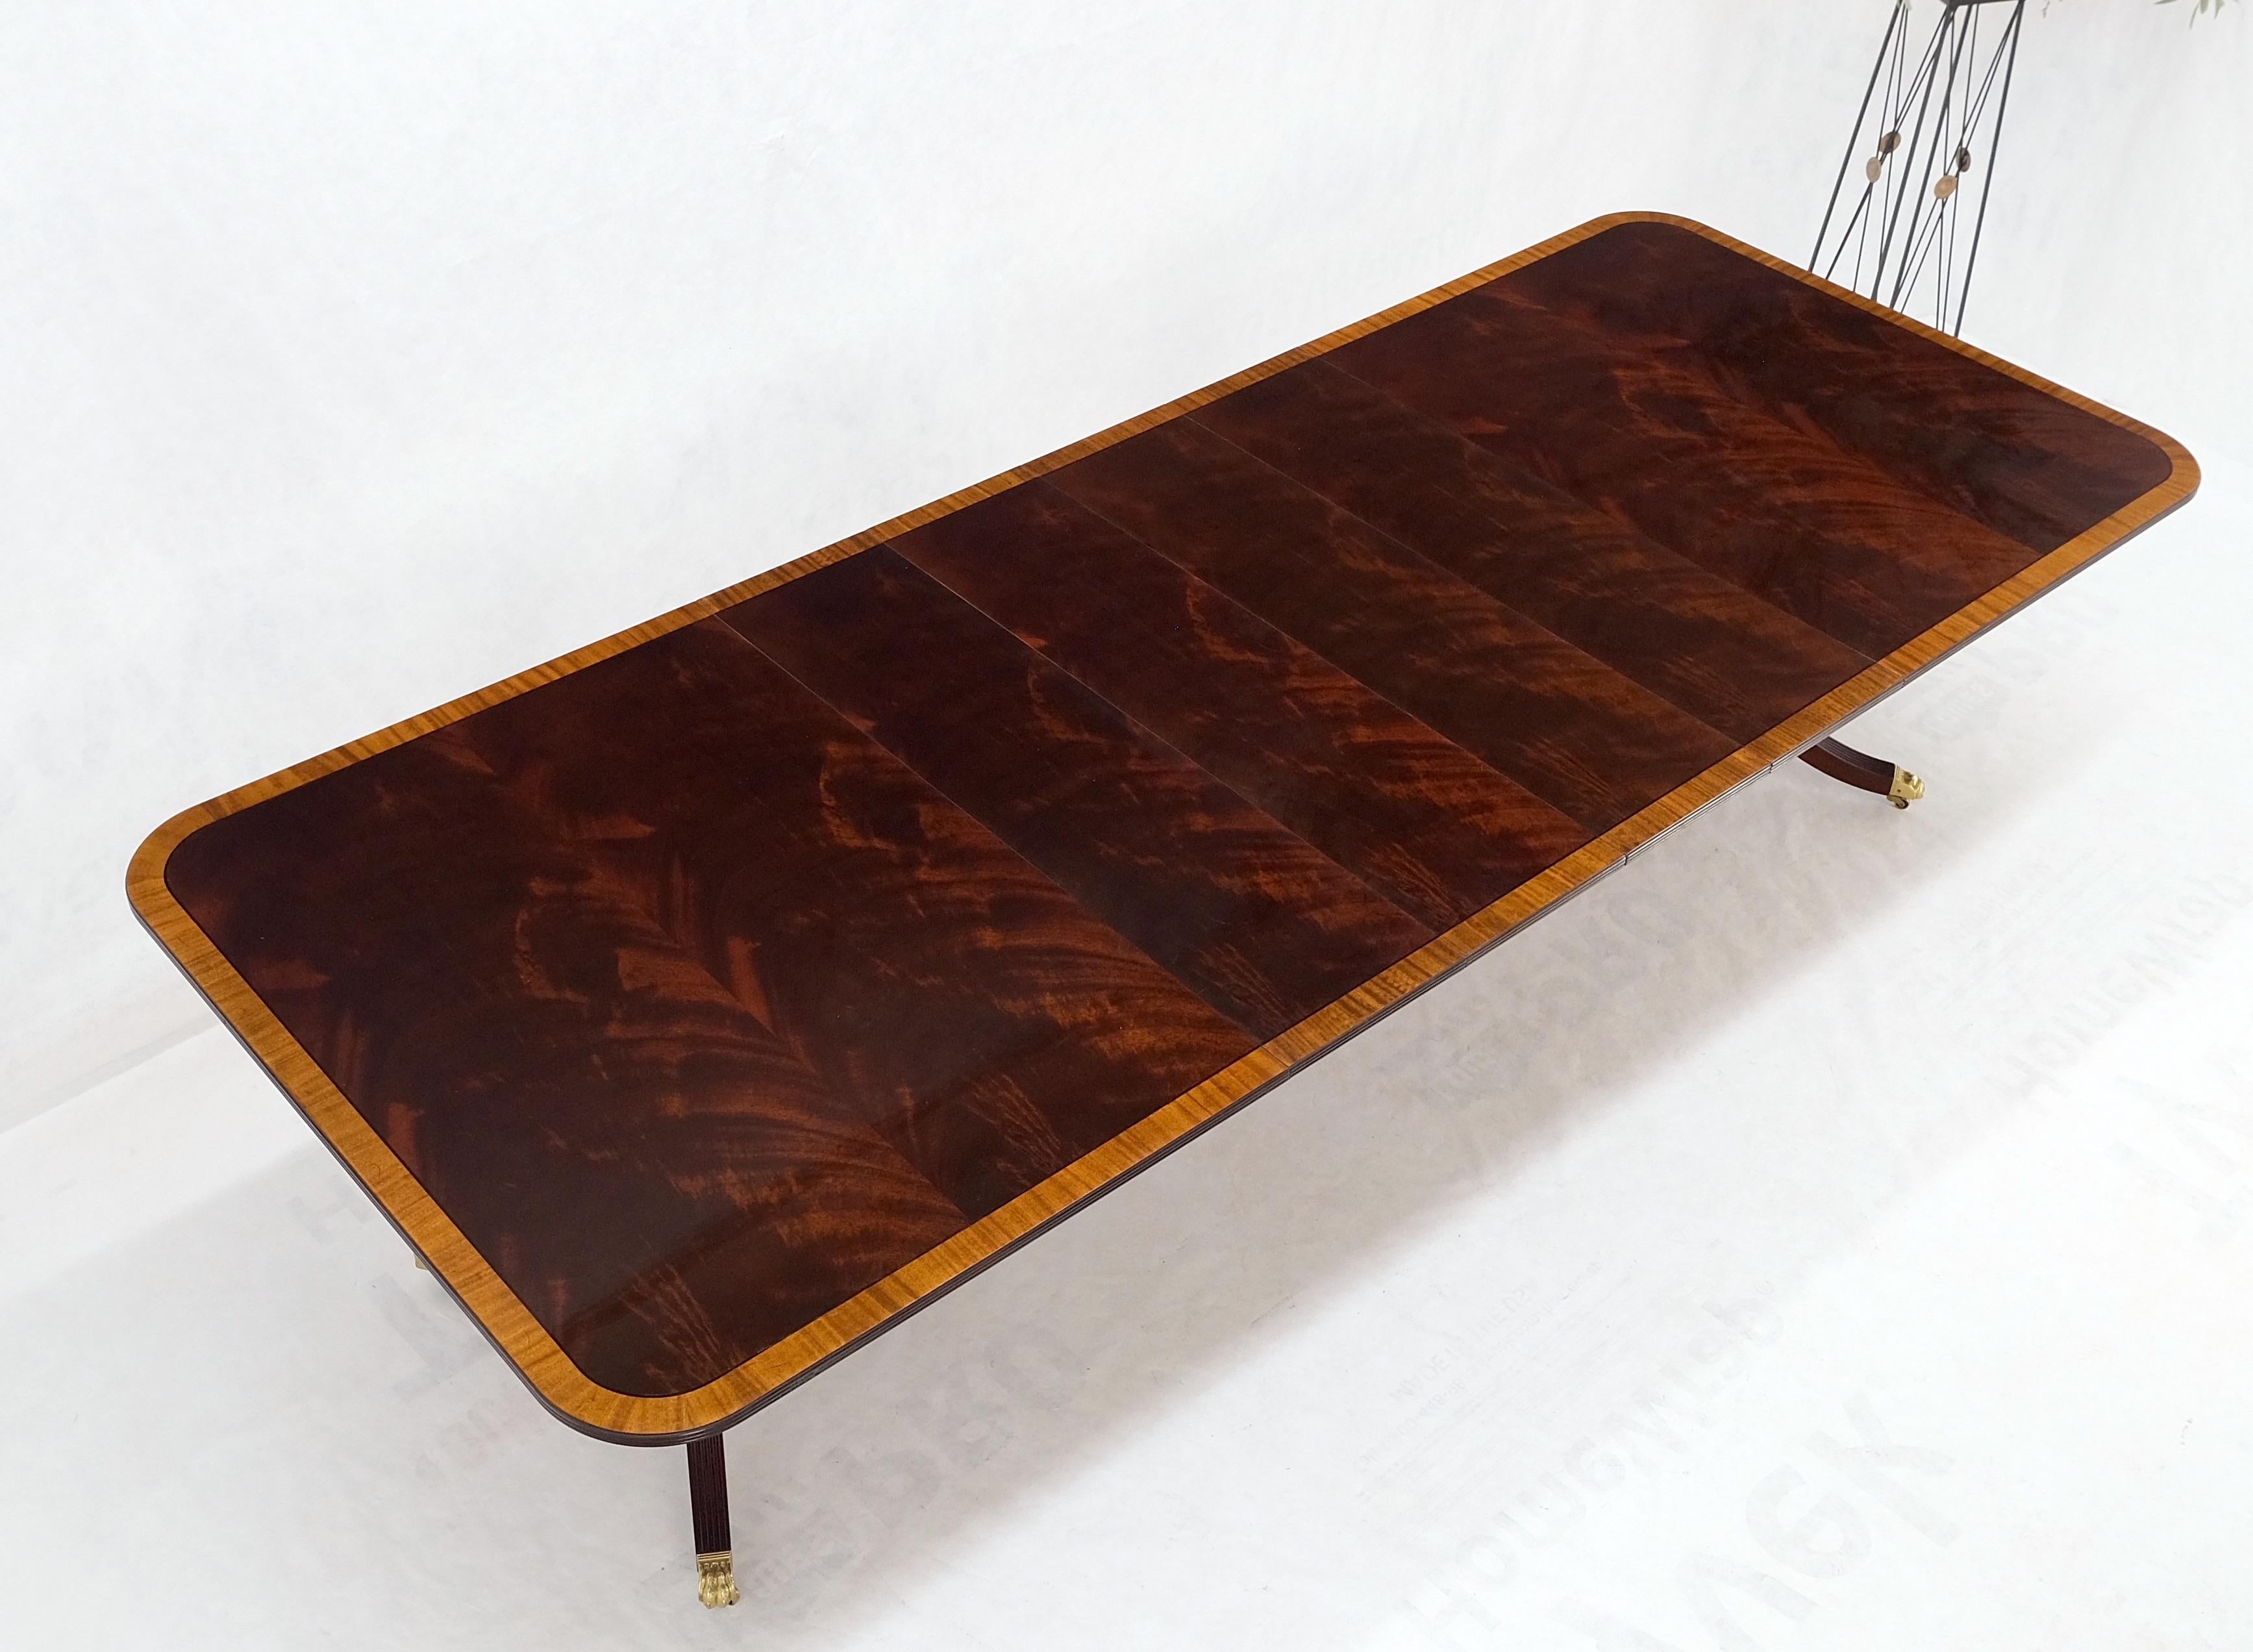 Double pedestal 4 leafs banded mahogany dining table by Kittinger Mint!